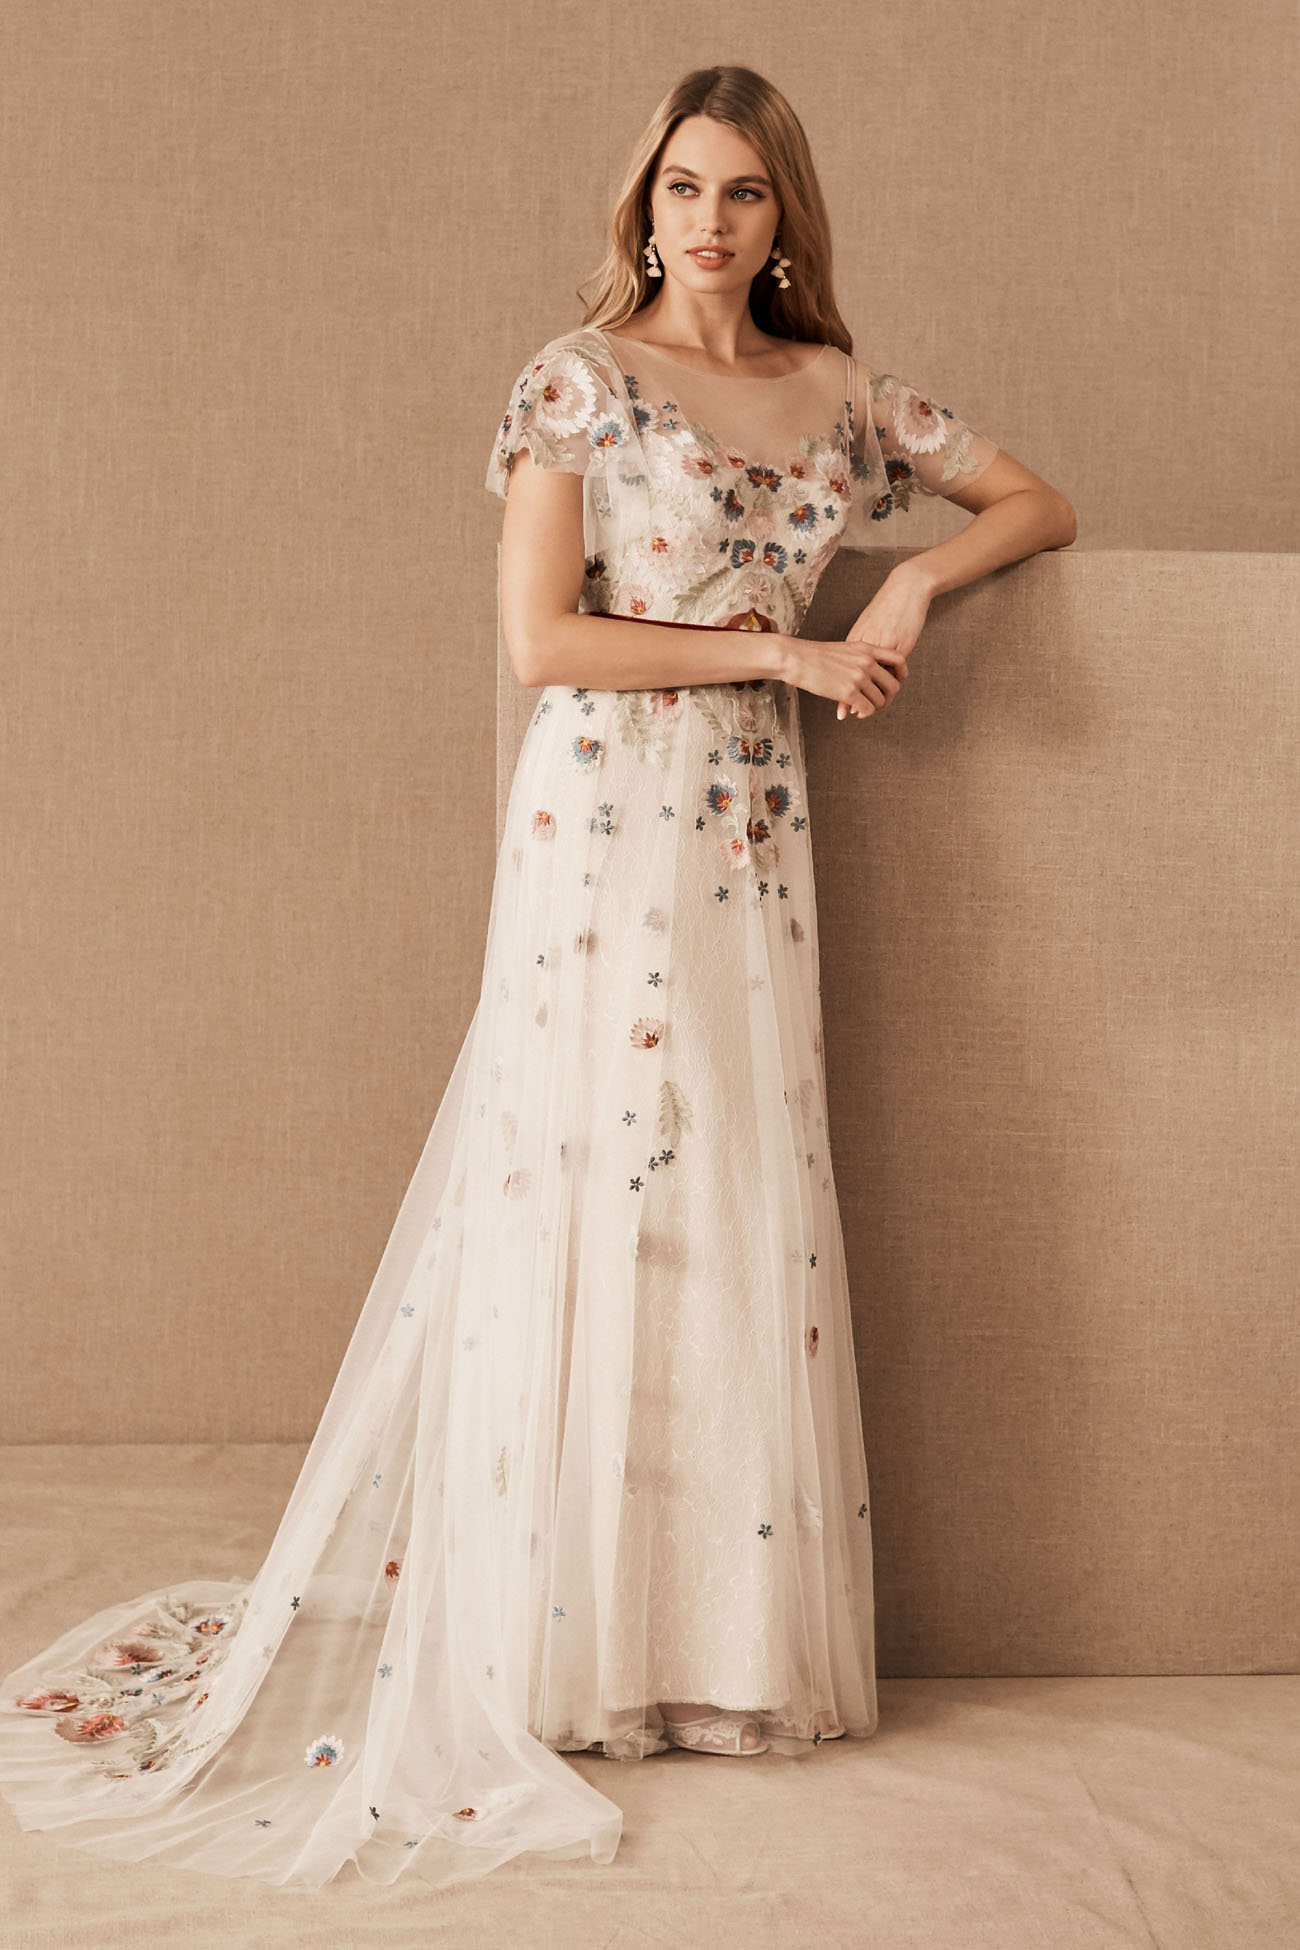 Trending Now! The Embroidered Wedding Dress These